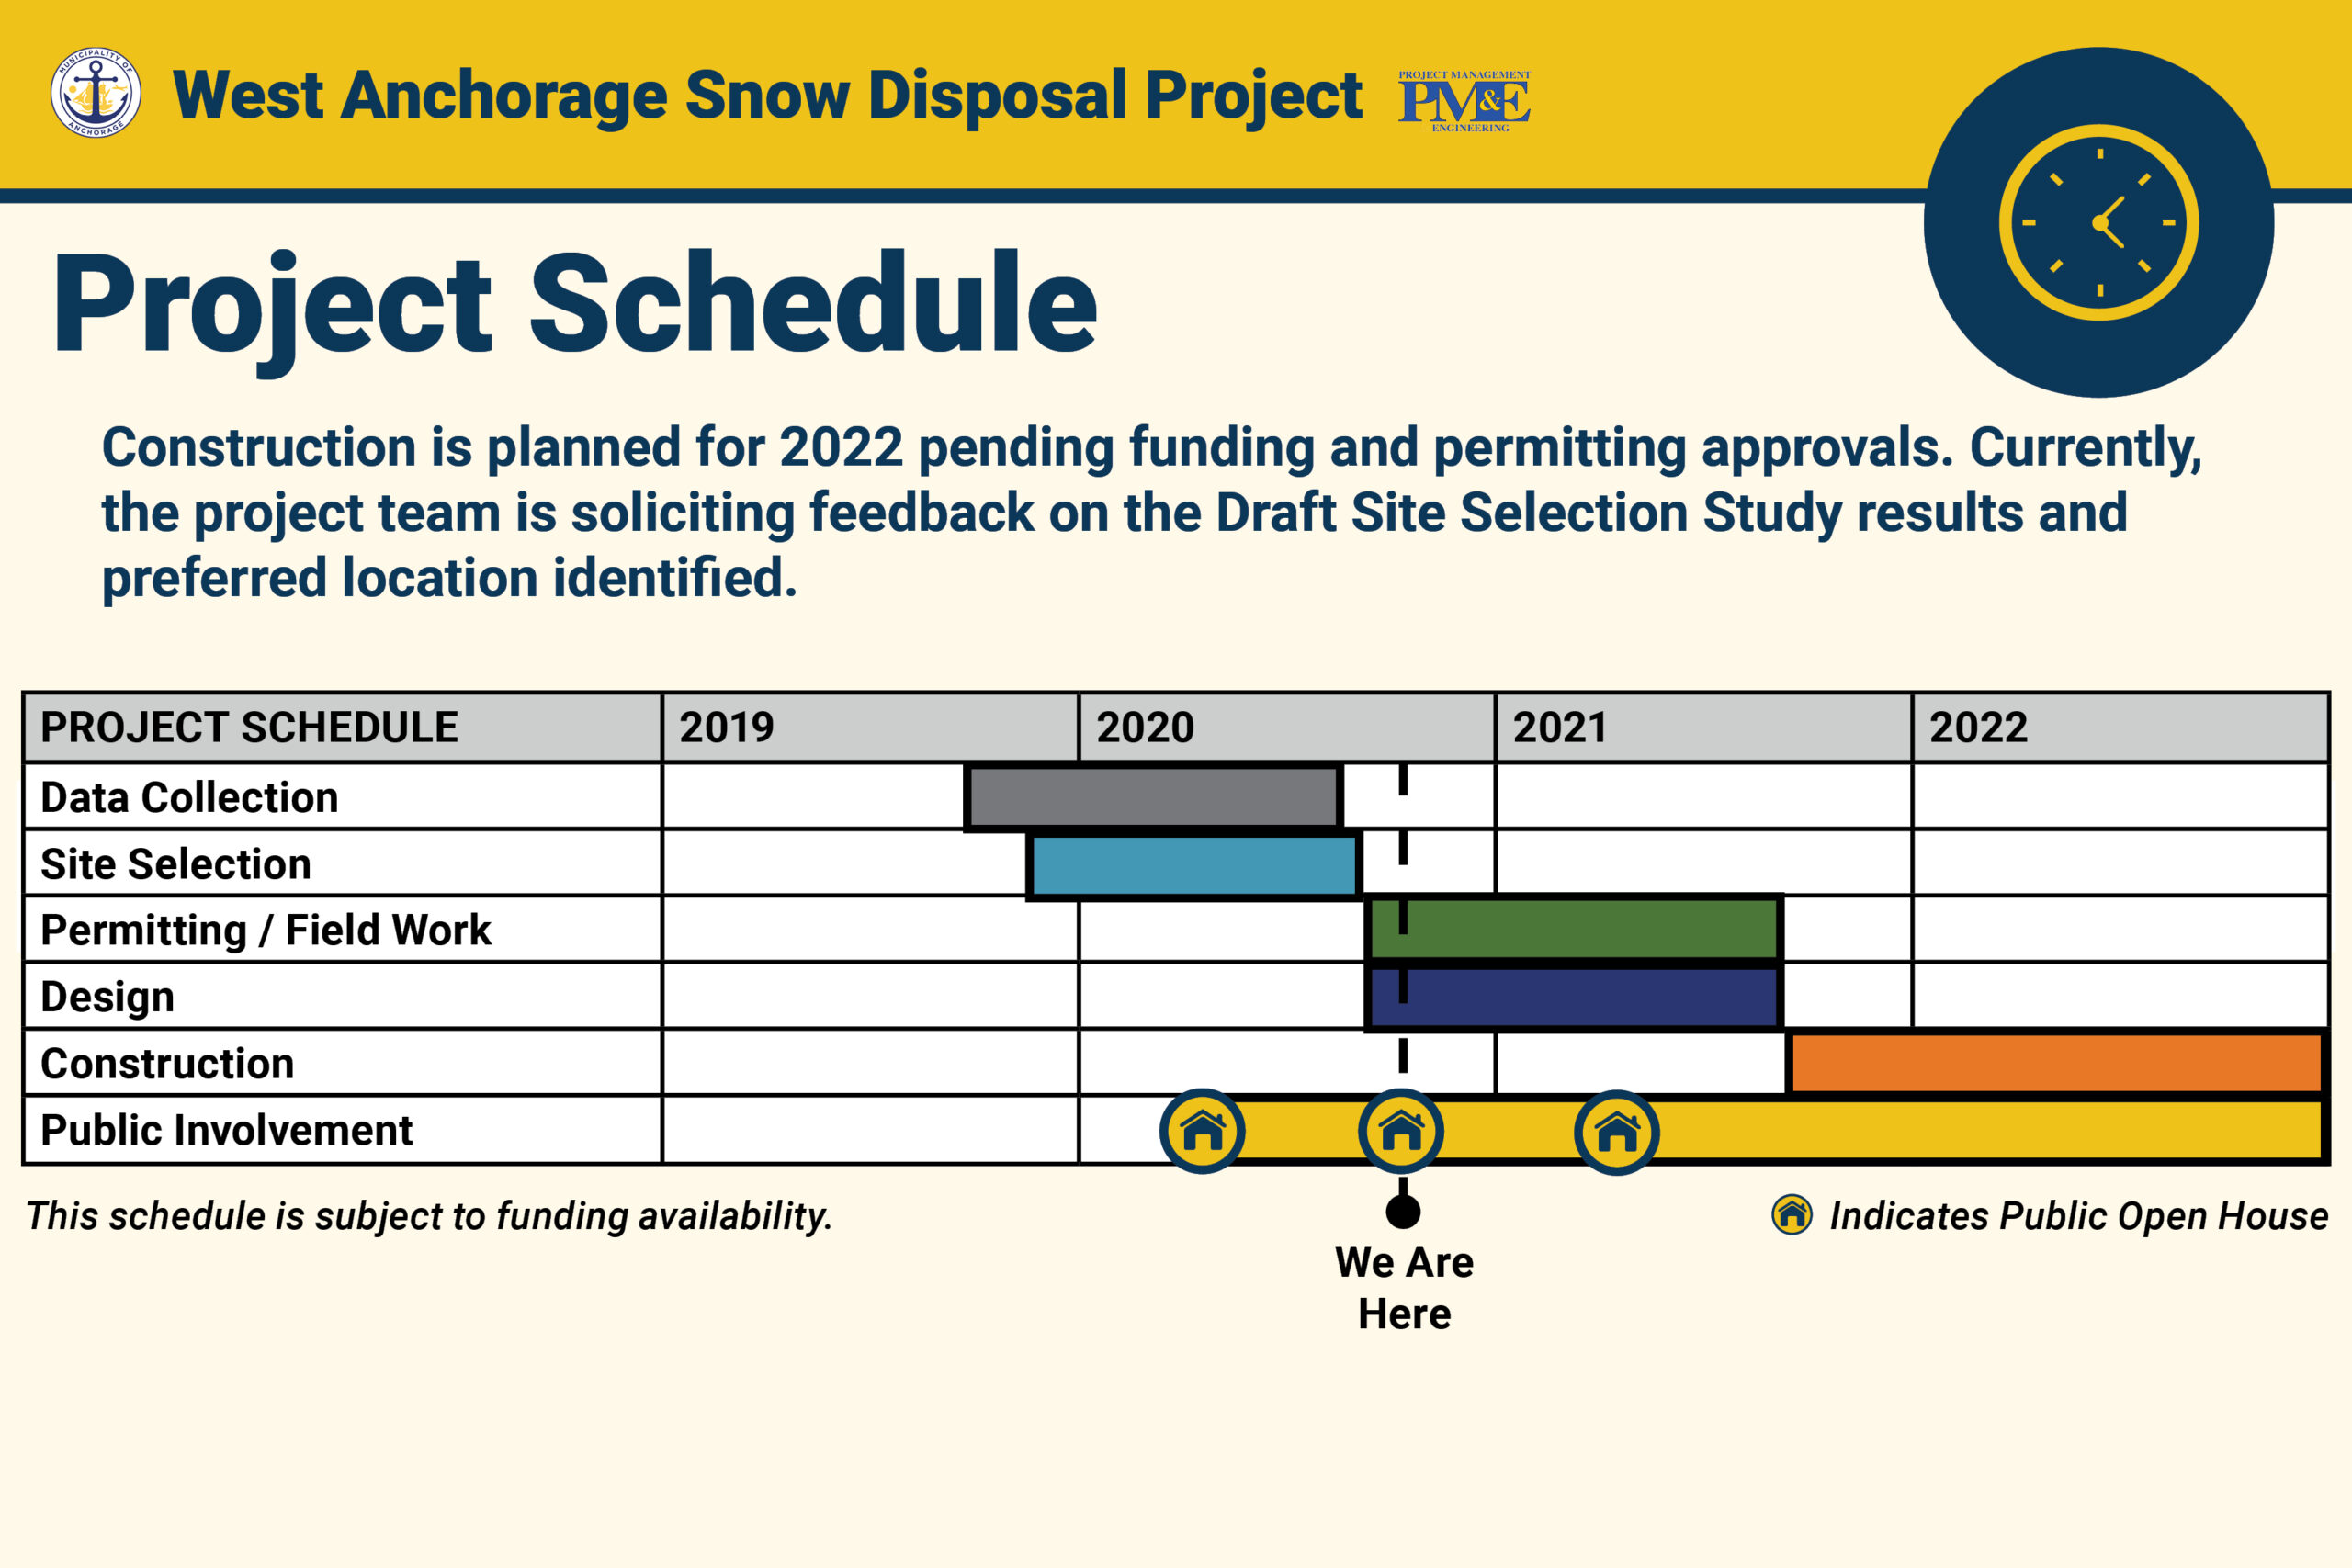 9. PROJECT SCHEDULE